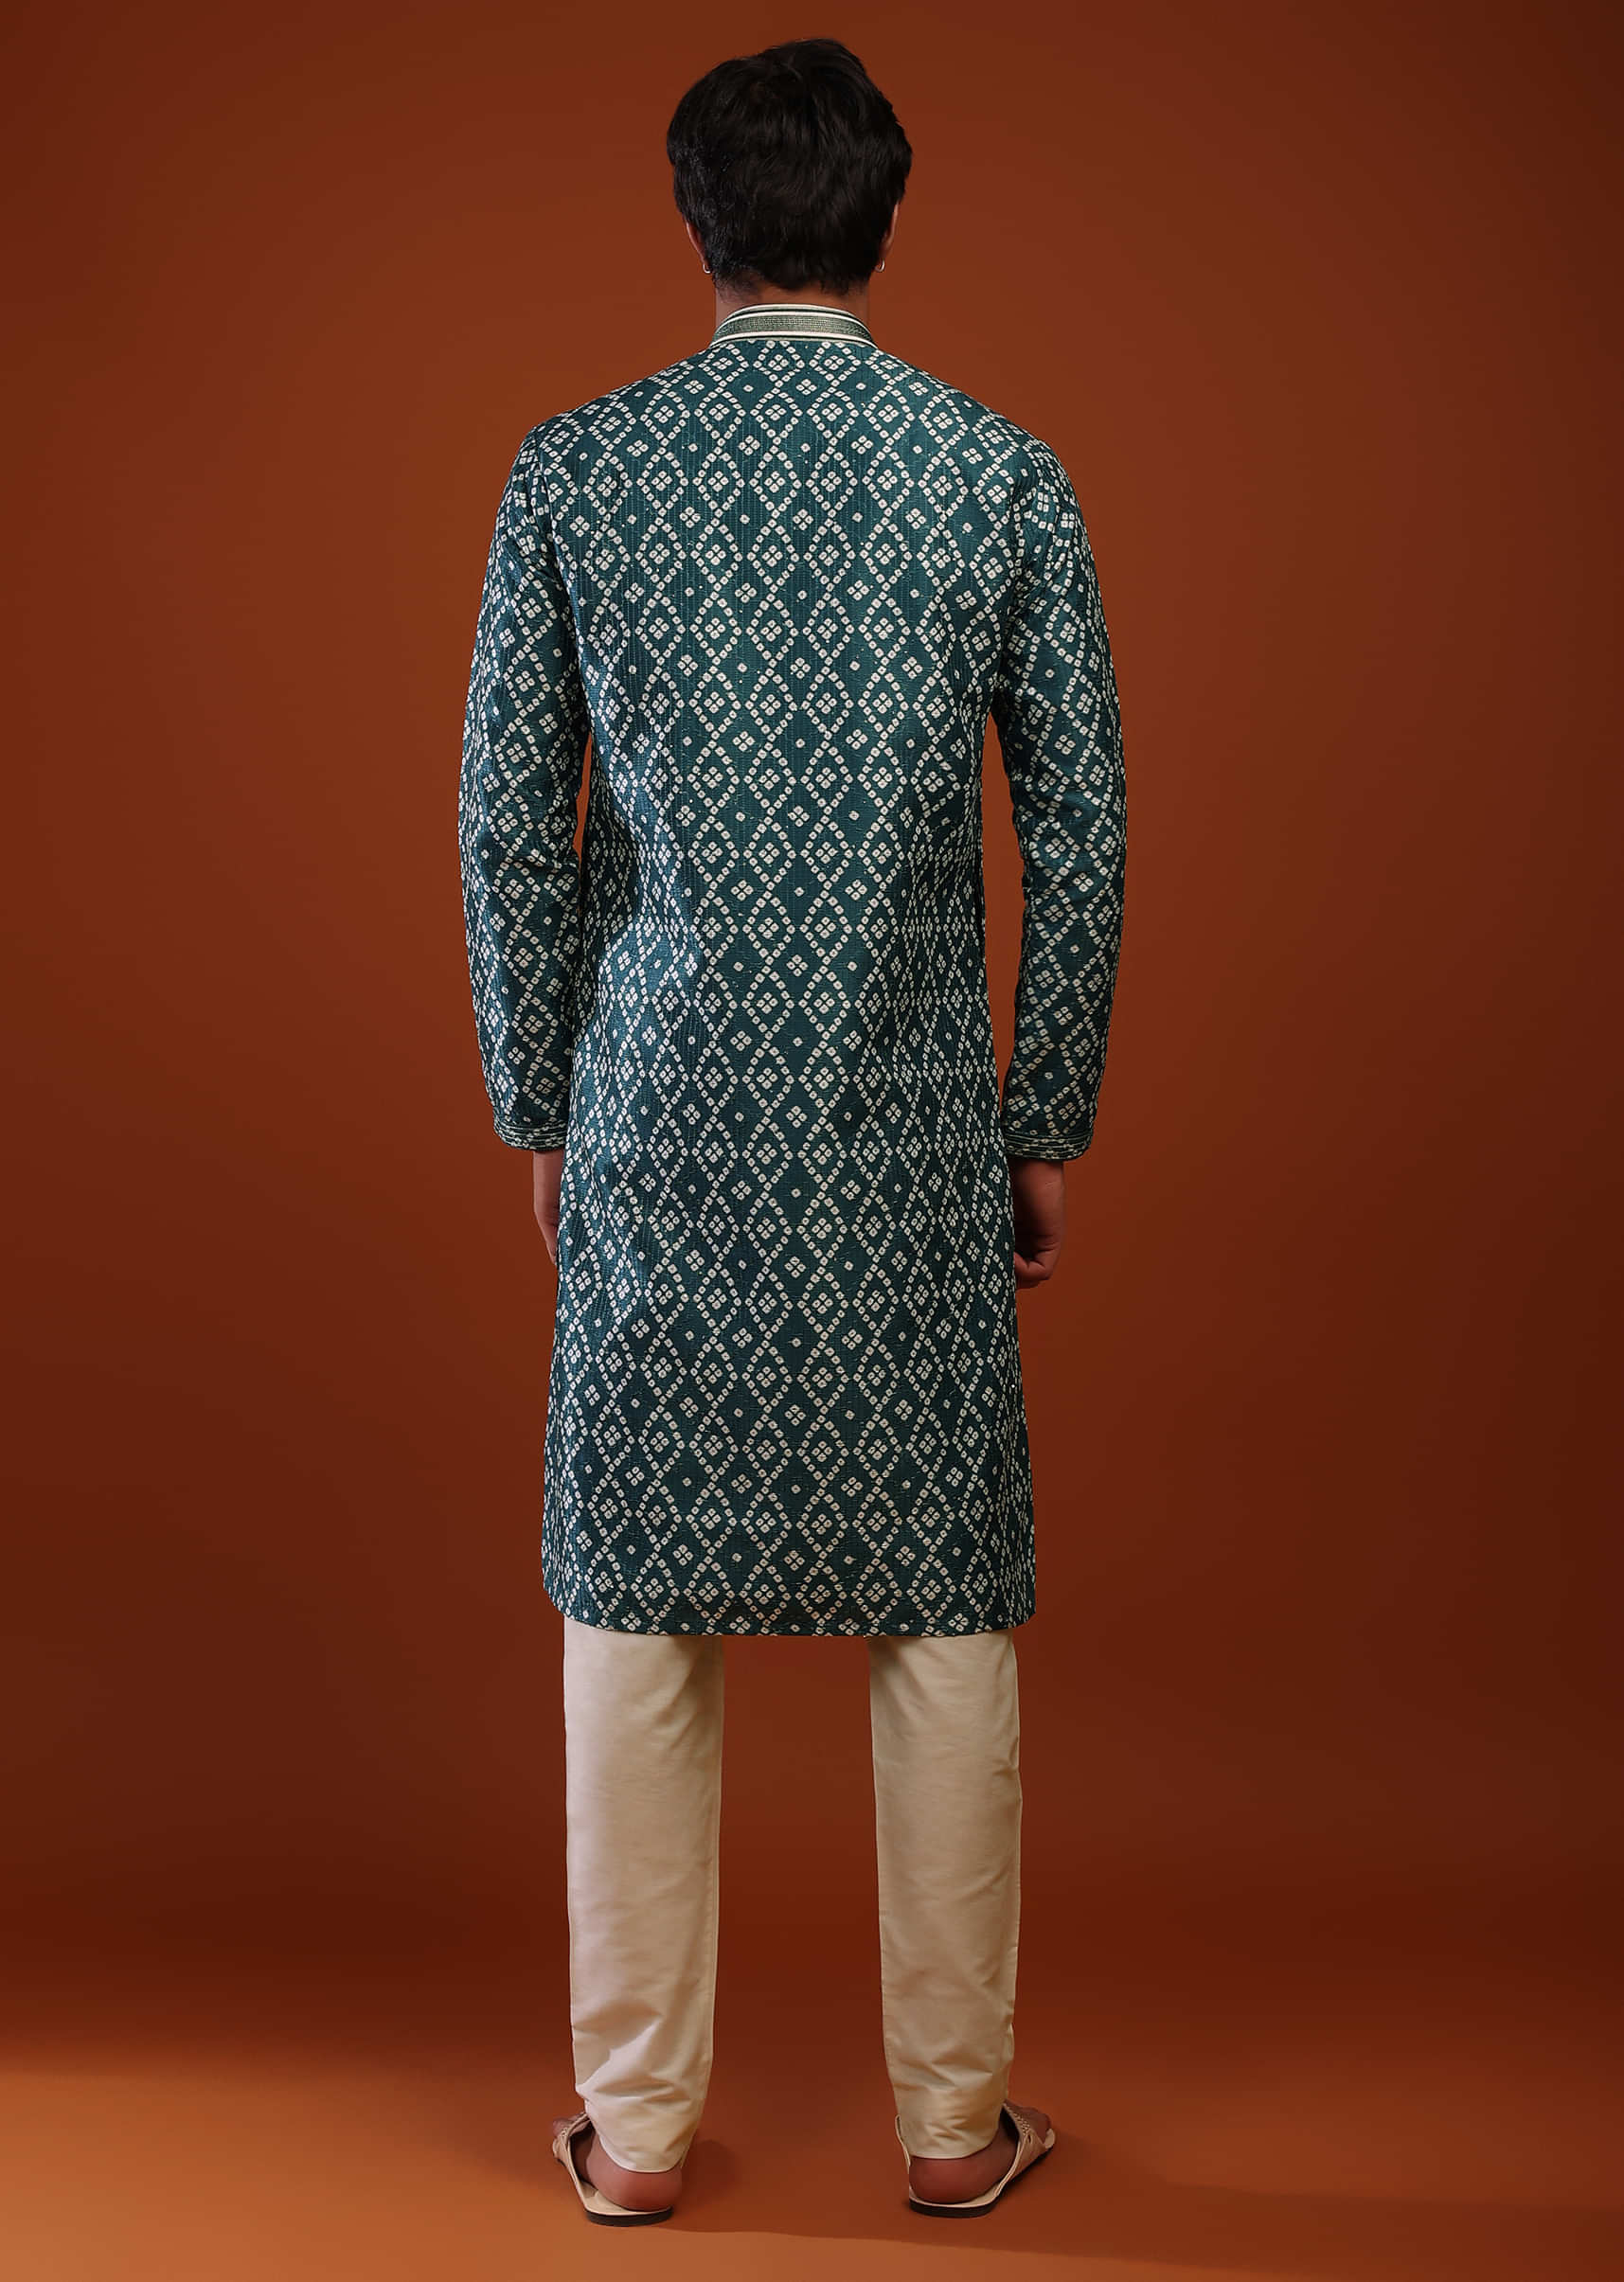 Ocean Blue Silk Kurta Set Adorned With Bandhani Print, Sequins And Threadwork Embroidery